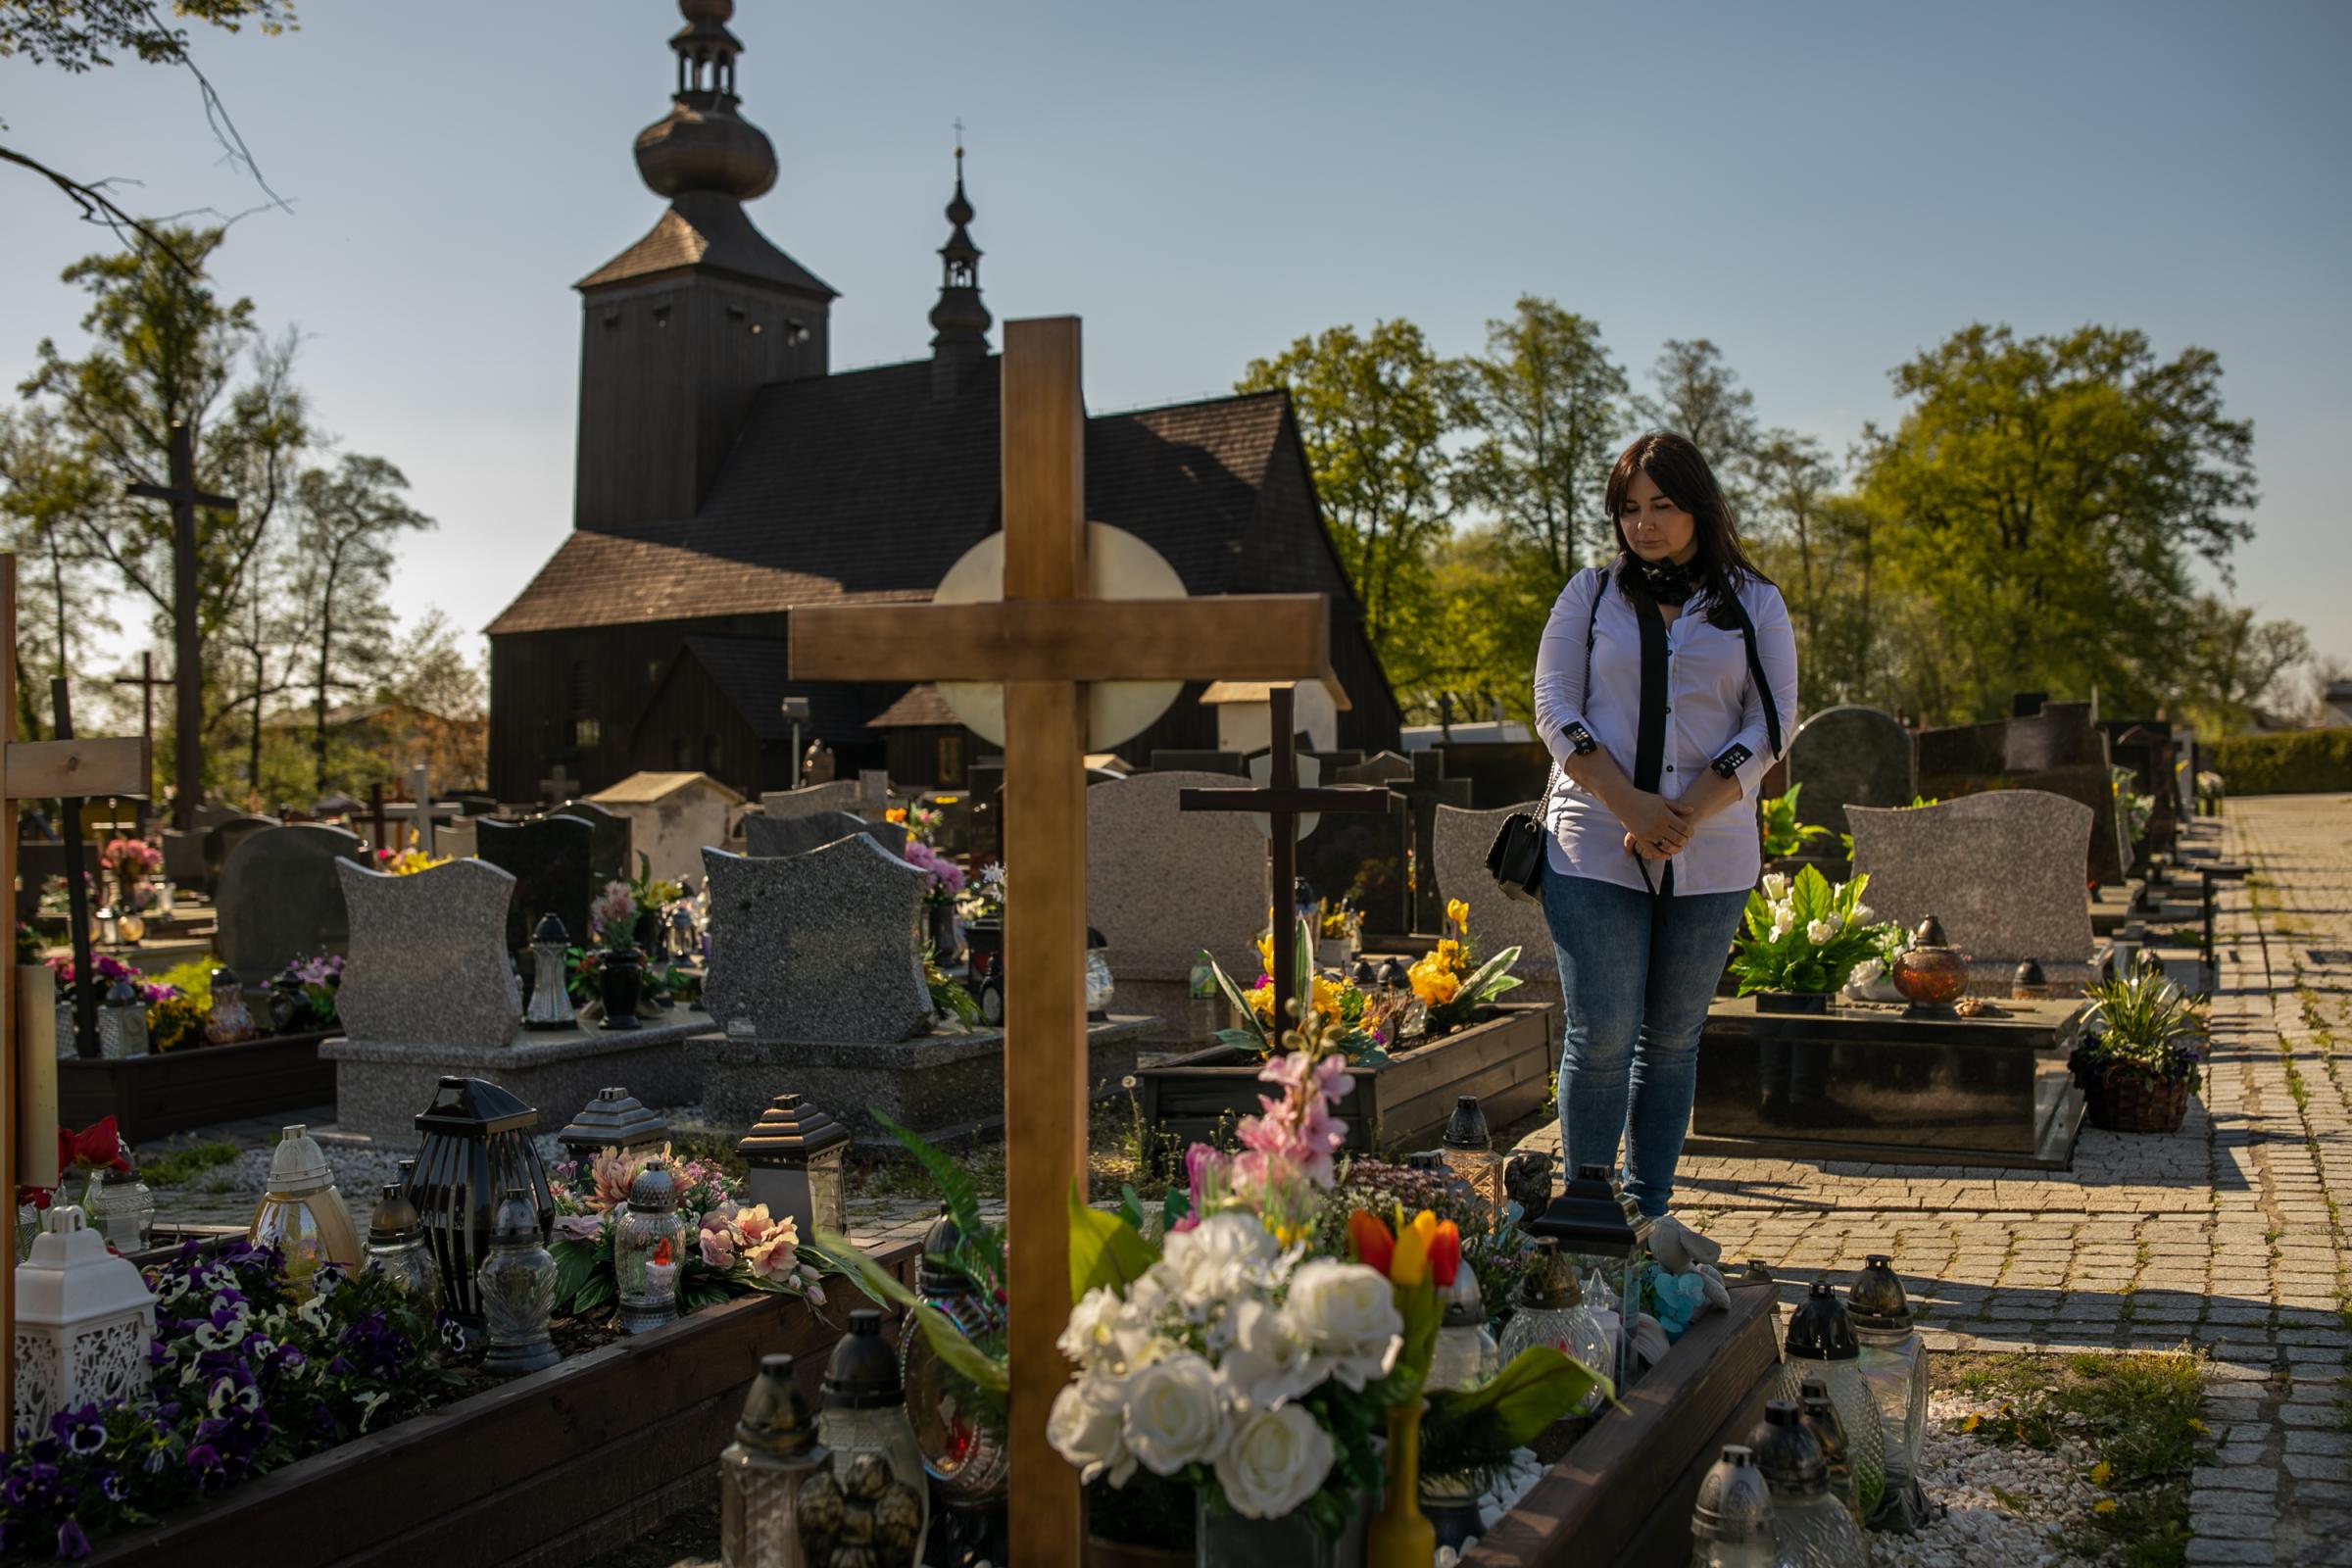 Barbara Skrobol visiting the grave of her sister-in-law Izabela Sajbor and her unborn child at a cemetery in Cwiklice, Poland